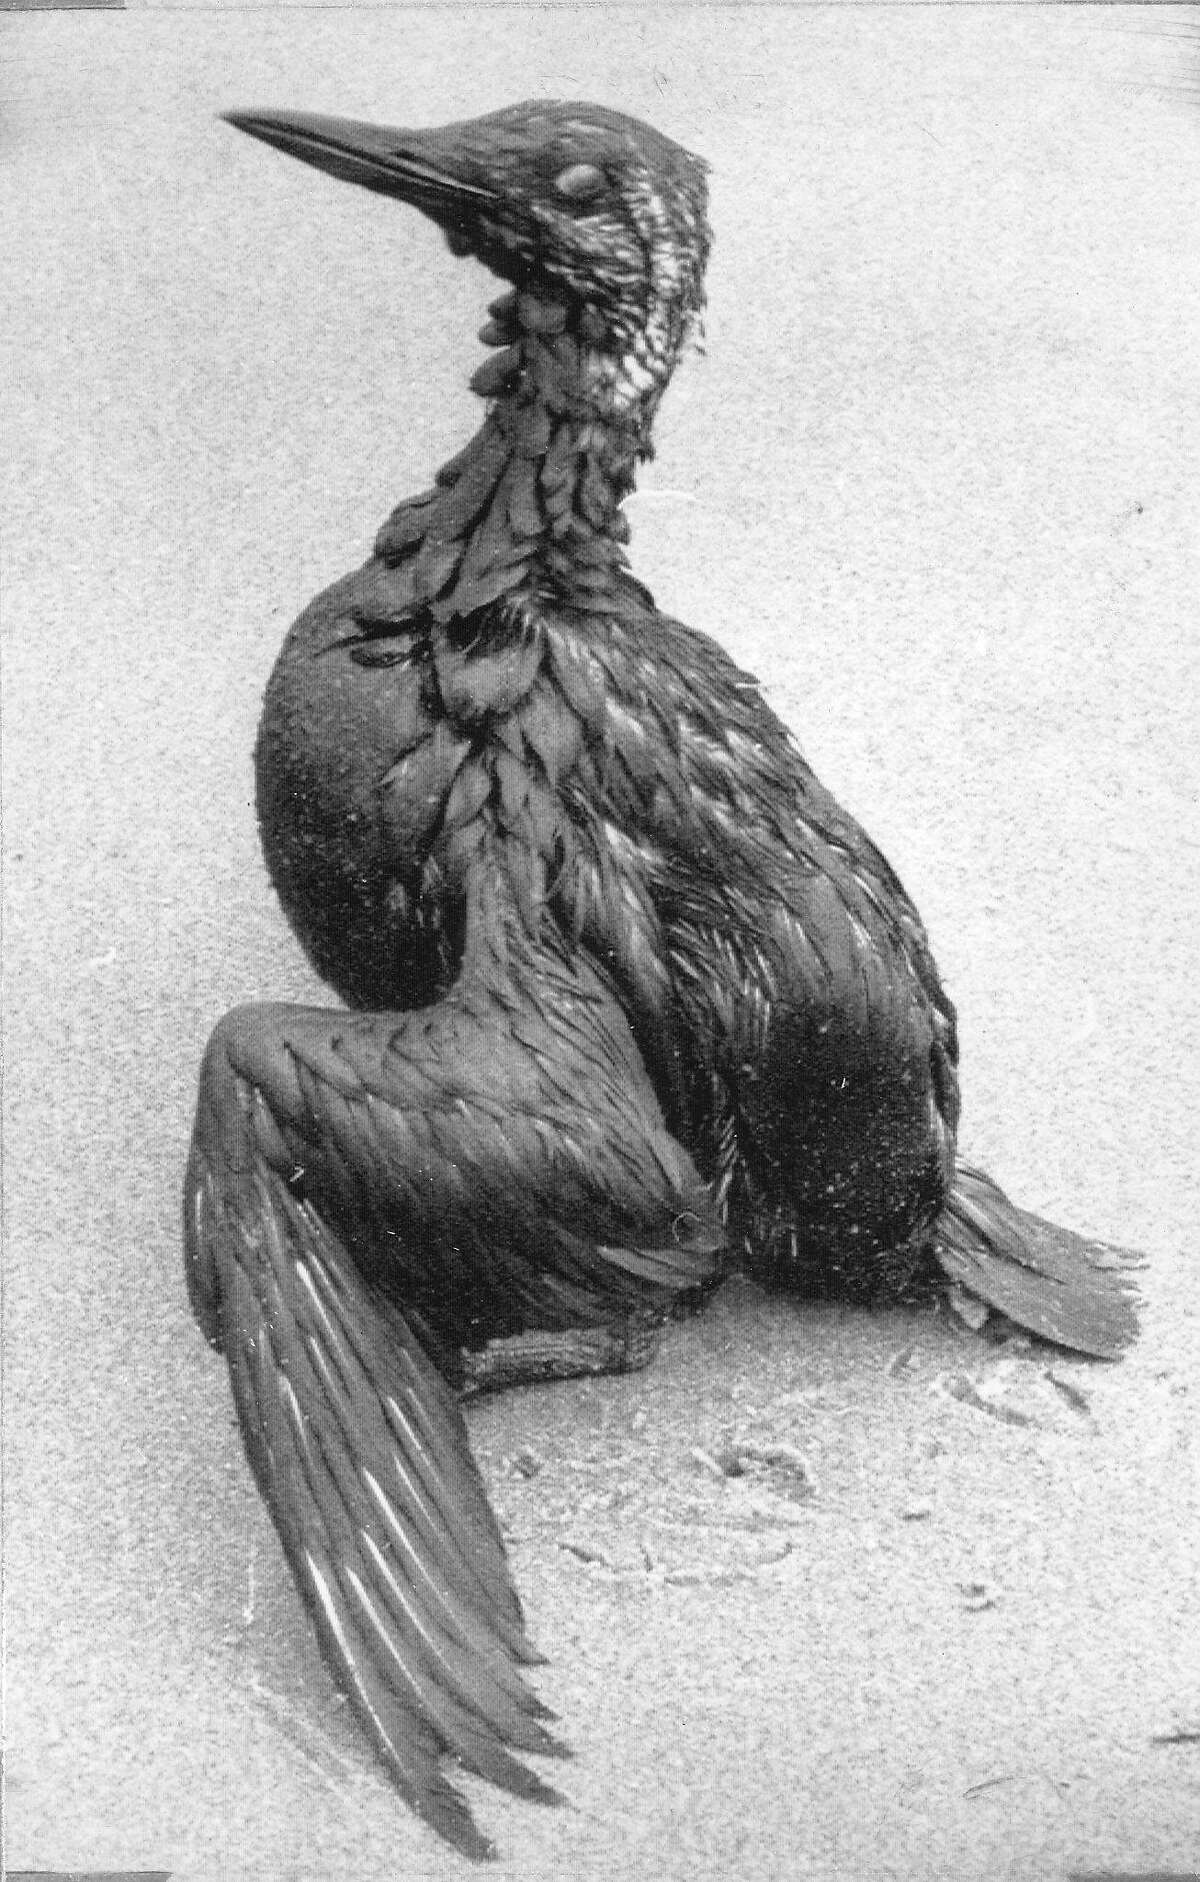 A California Murre, one of many birds found covered in oil at Santa Barbara Channel, after oil seepage caused by a a natural gas blowout, January 31, 1969 United Press International photo ran 2/1/1969, p. 12